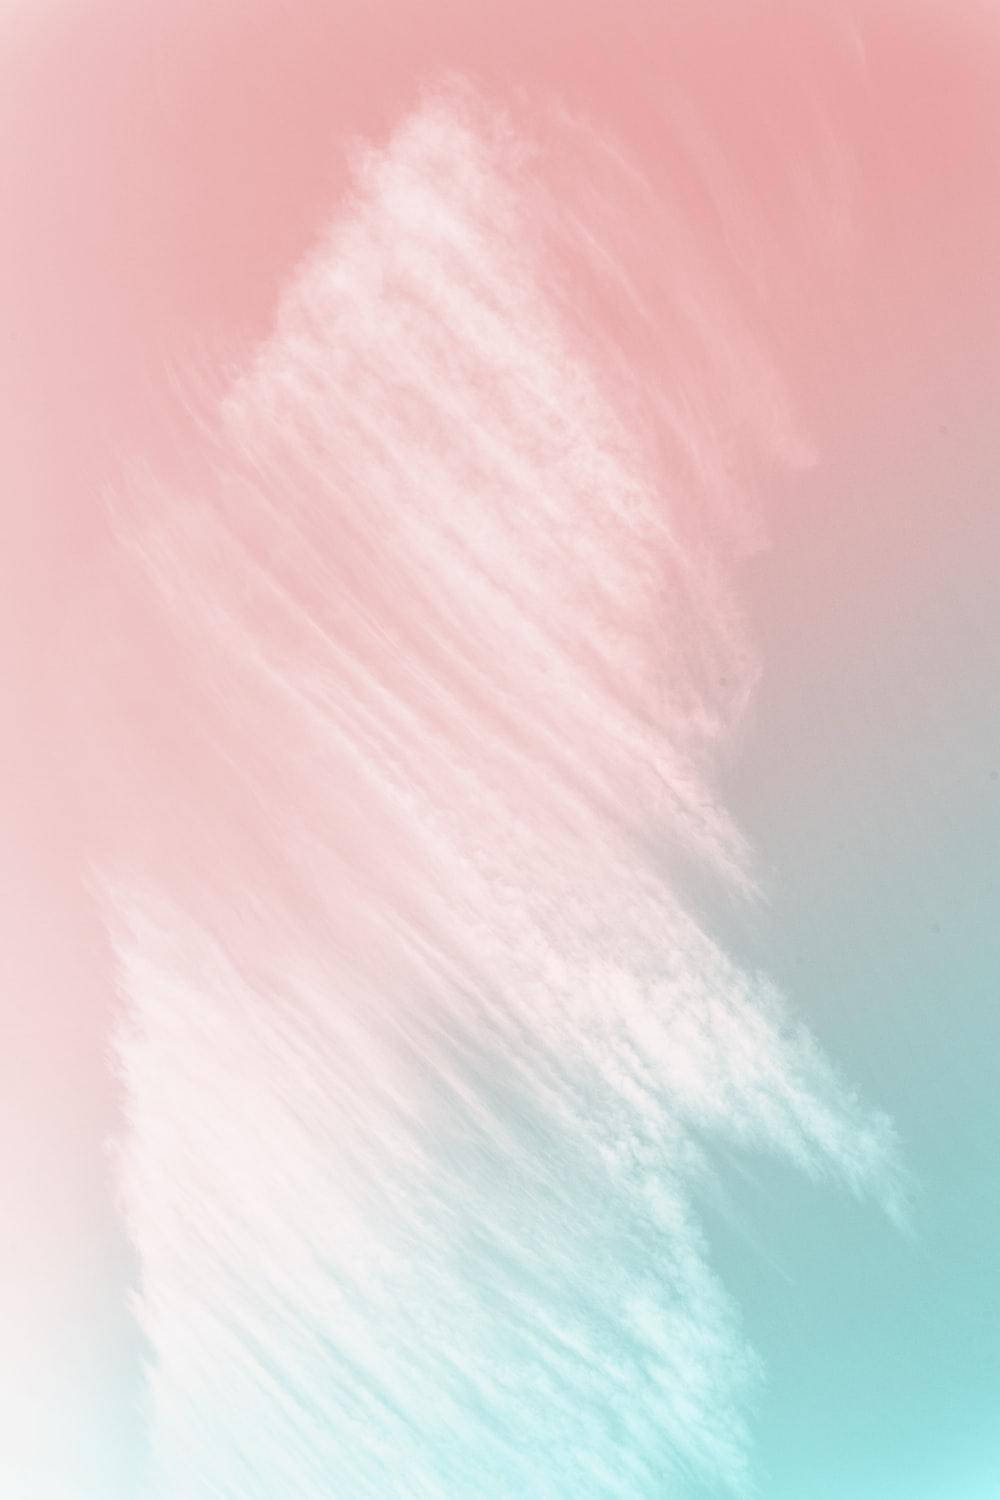 Iphone Pink Aesthetic Paint Strokes Background